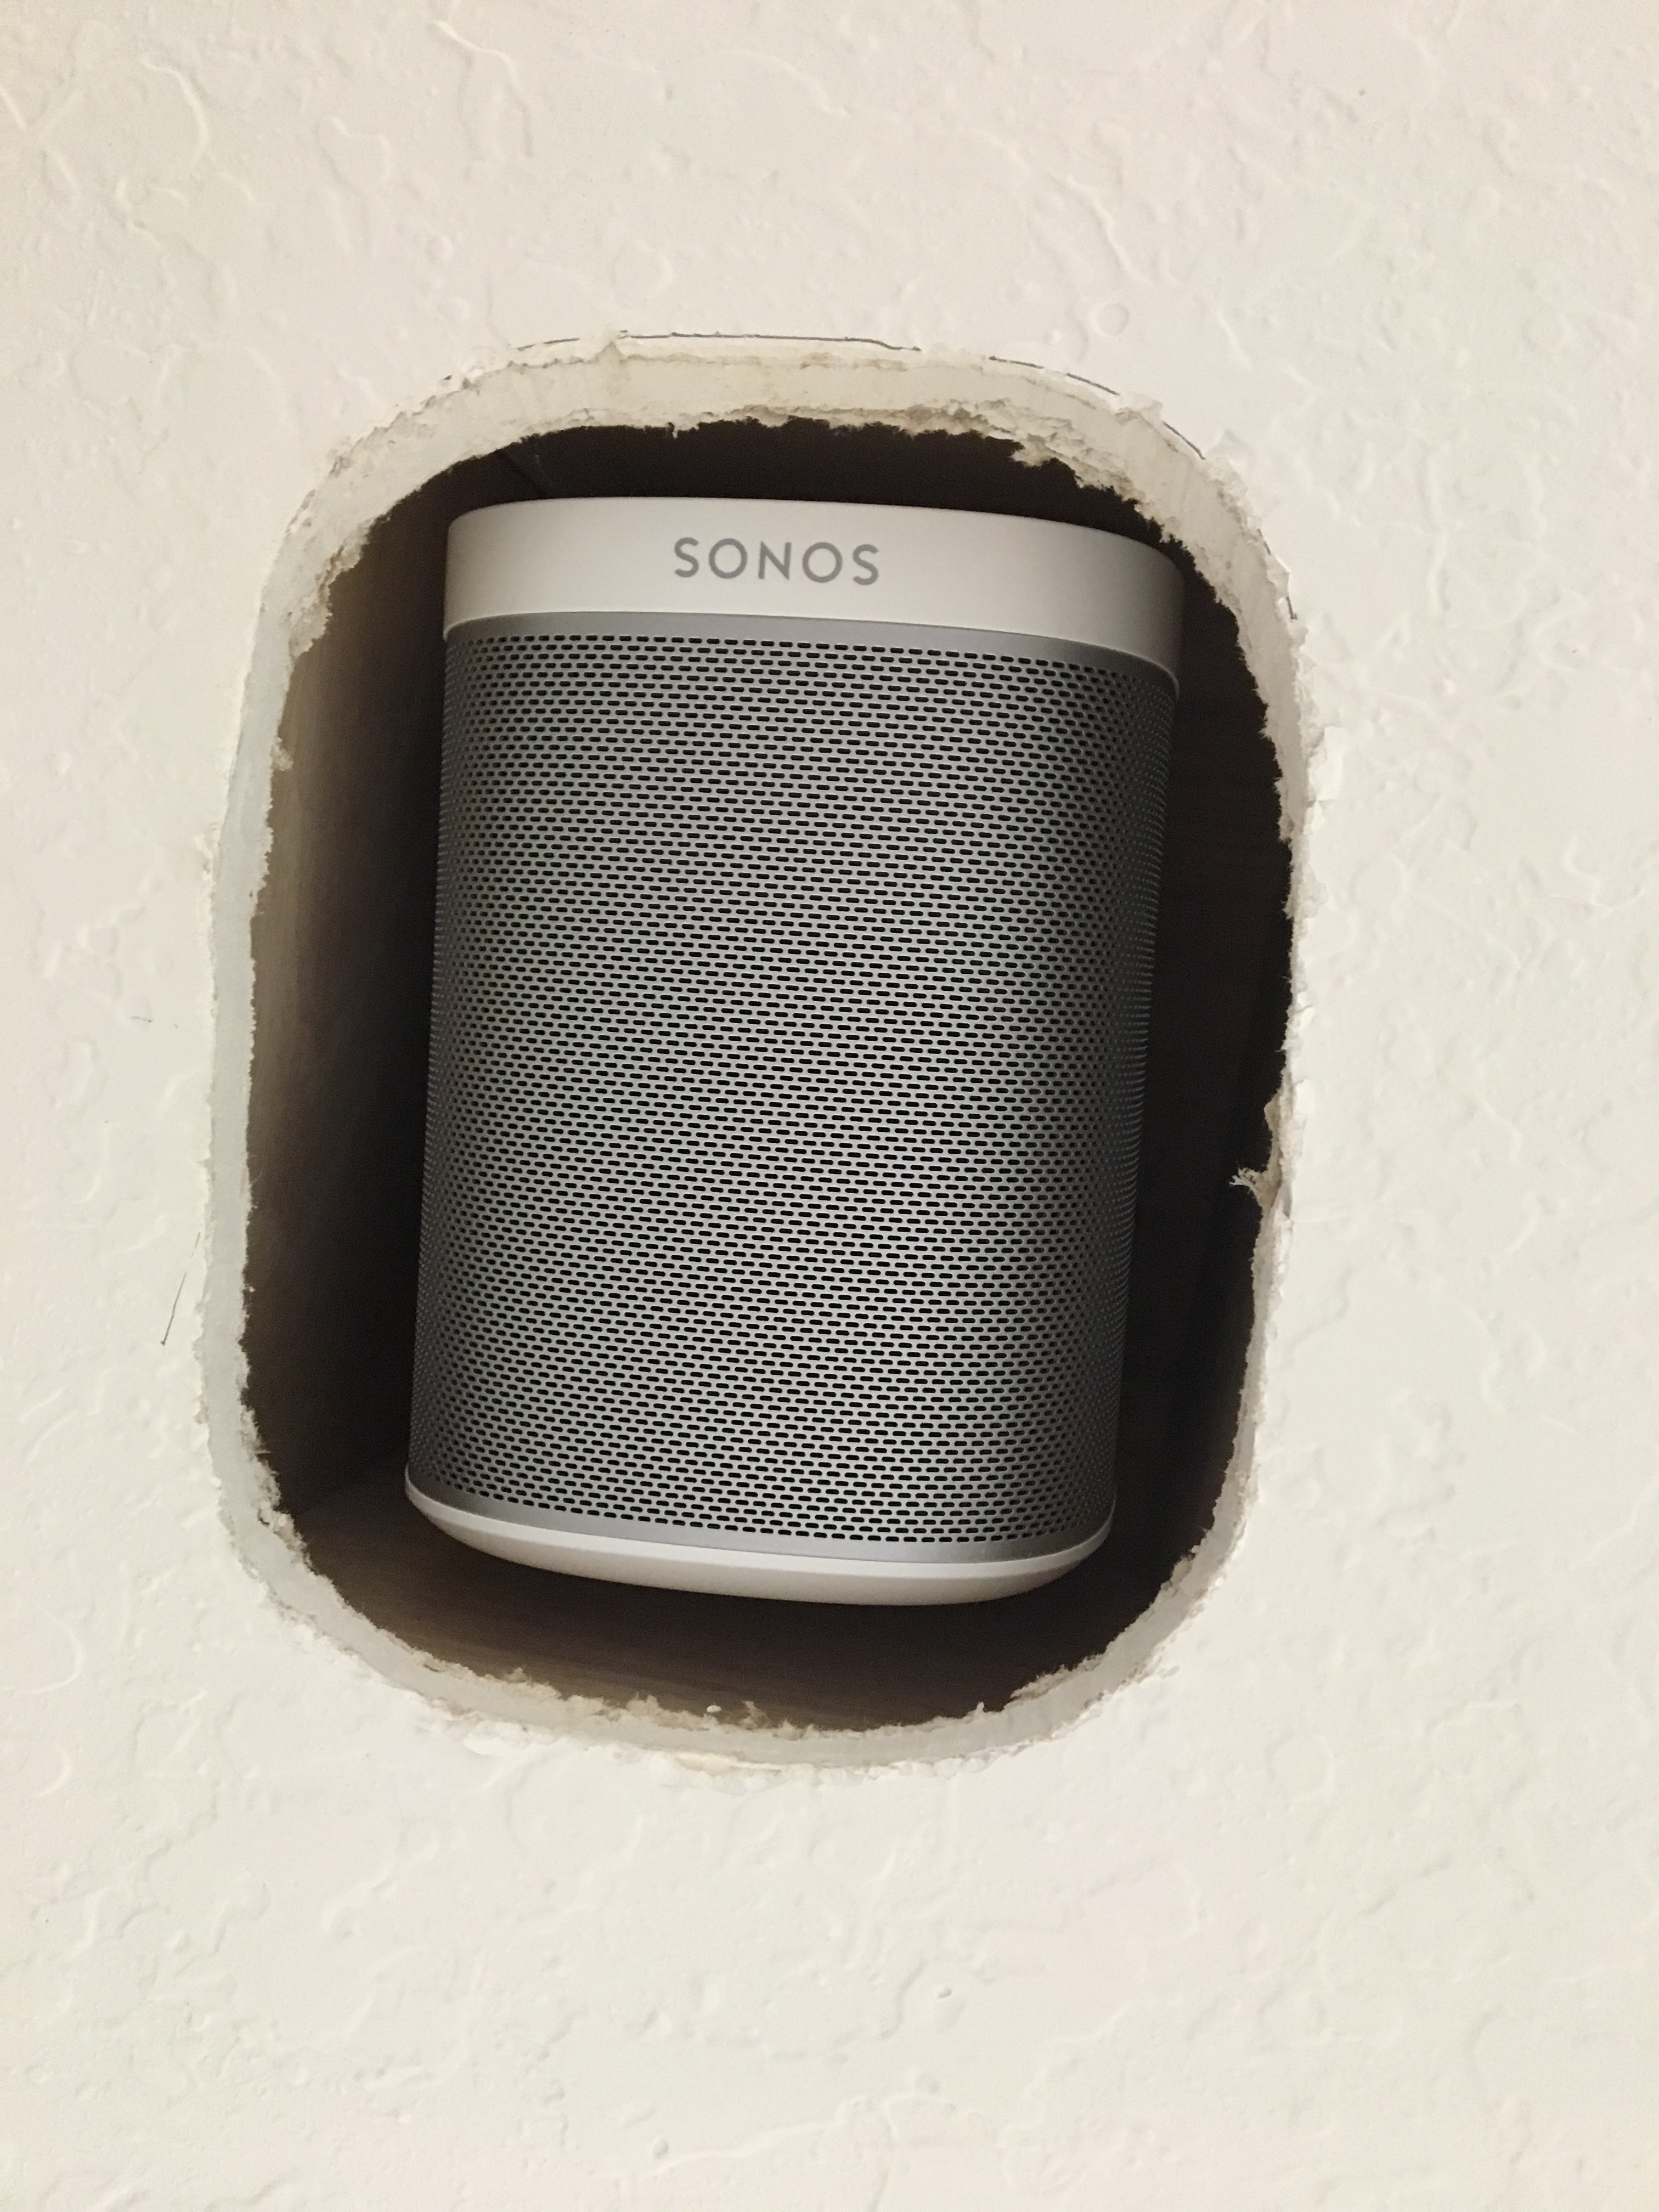 how to install sonos speakers in the ceilling